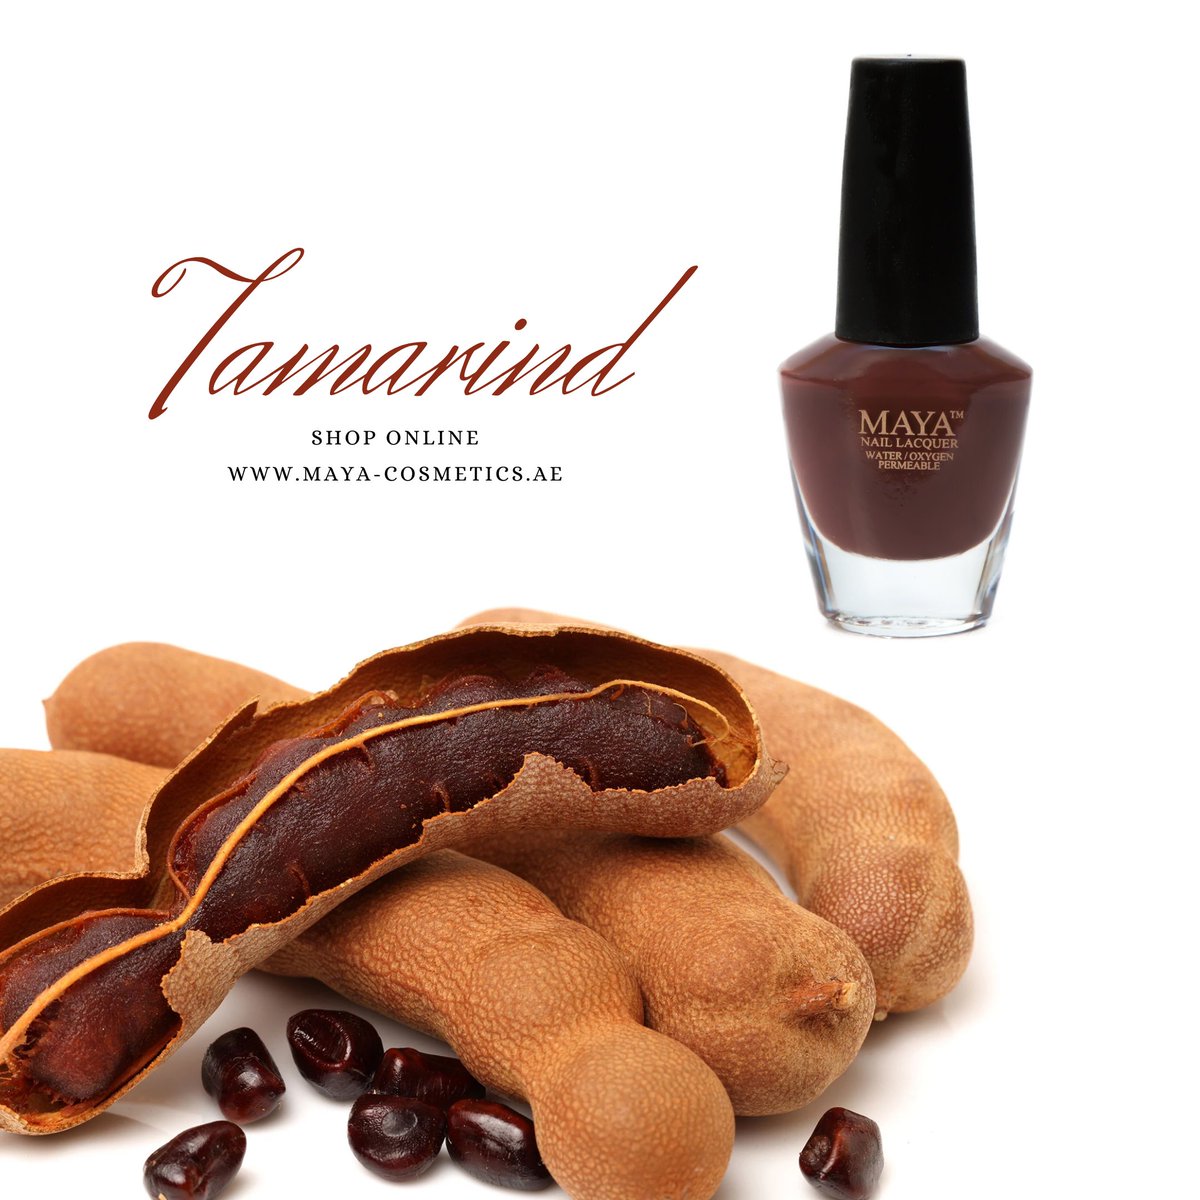 Maya’s Tamarind brown is an on-the-go colour for the hustlers.

Tamarind has the perfect undertone for any monochromatic outfit too 💁‍♀️

#breathablenailpolish #breathablenails #halalnailpolish #mayacosmeticsuae